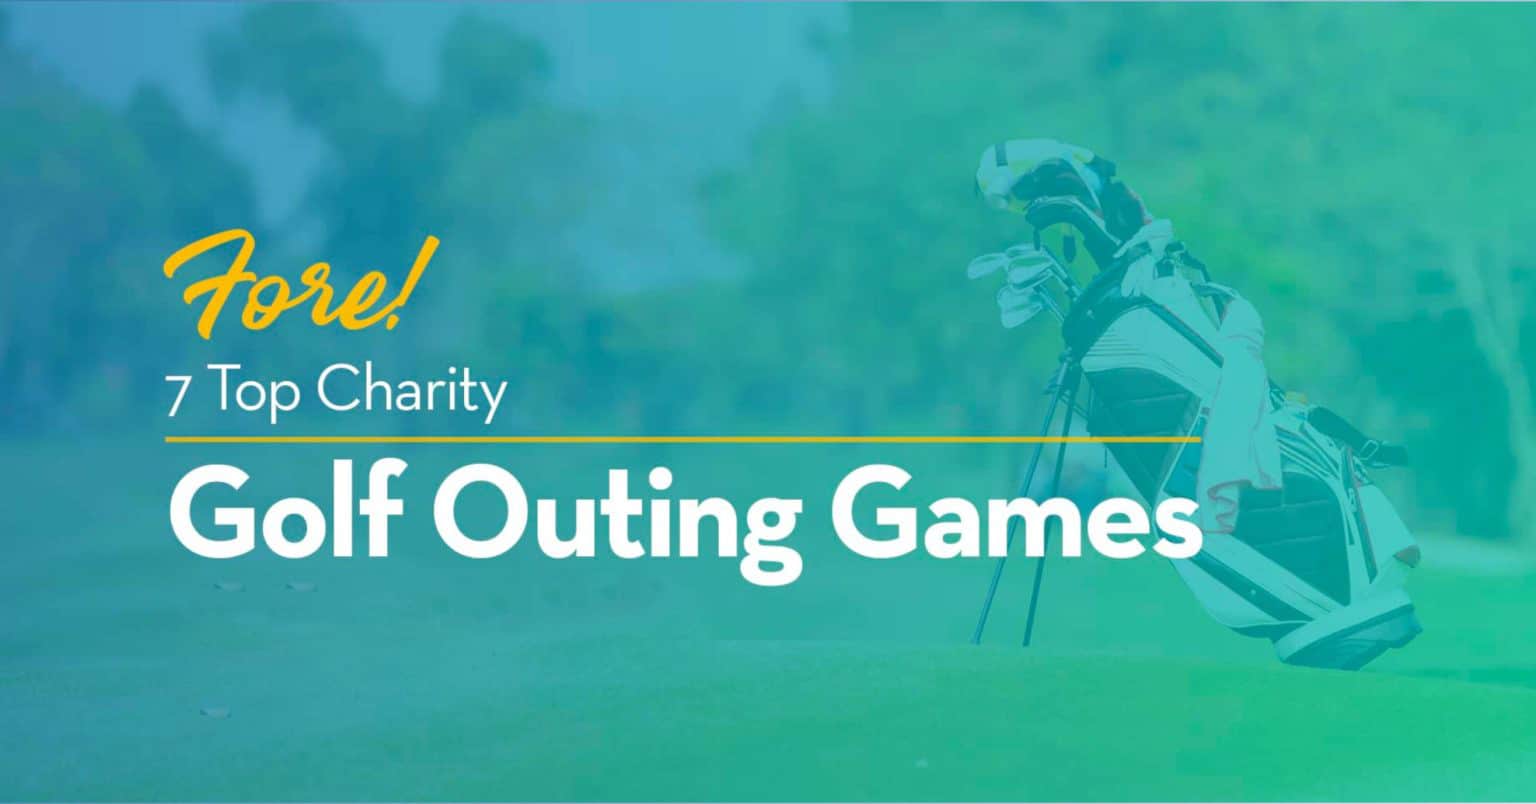 Fore! 7 Great Charity Golf Outing Games for Your Tournament